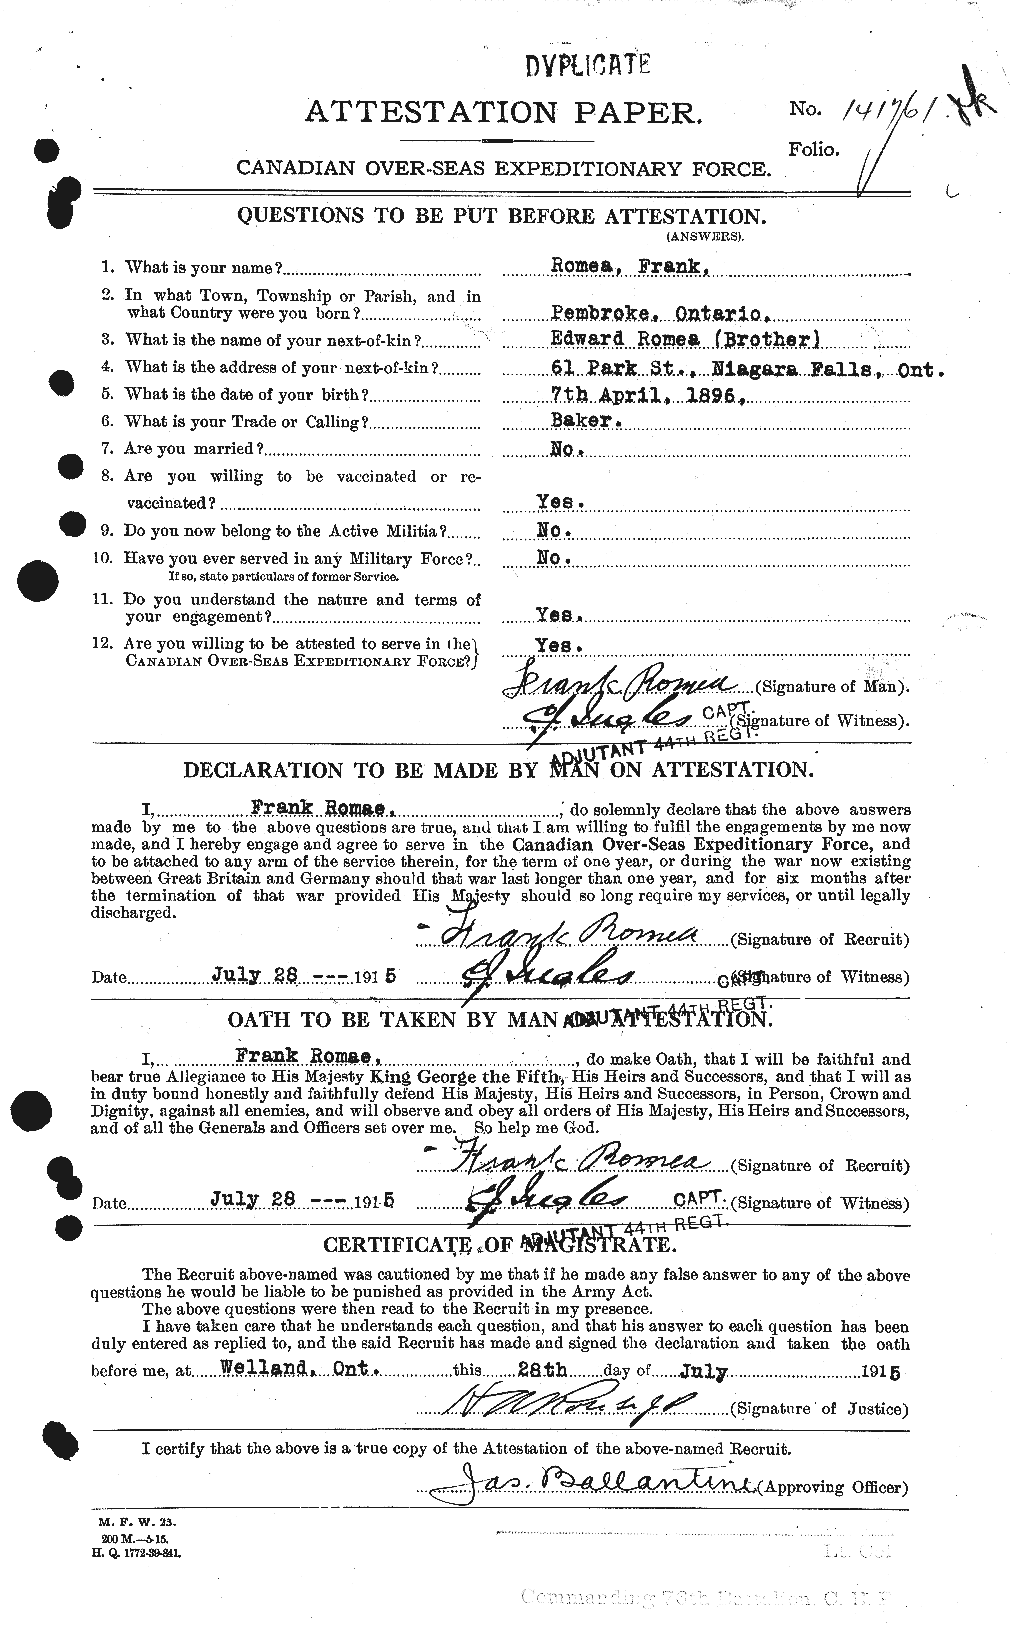 Personnel Records of the First World War - CEF 613606a